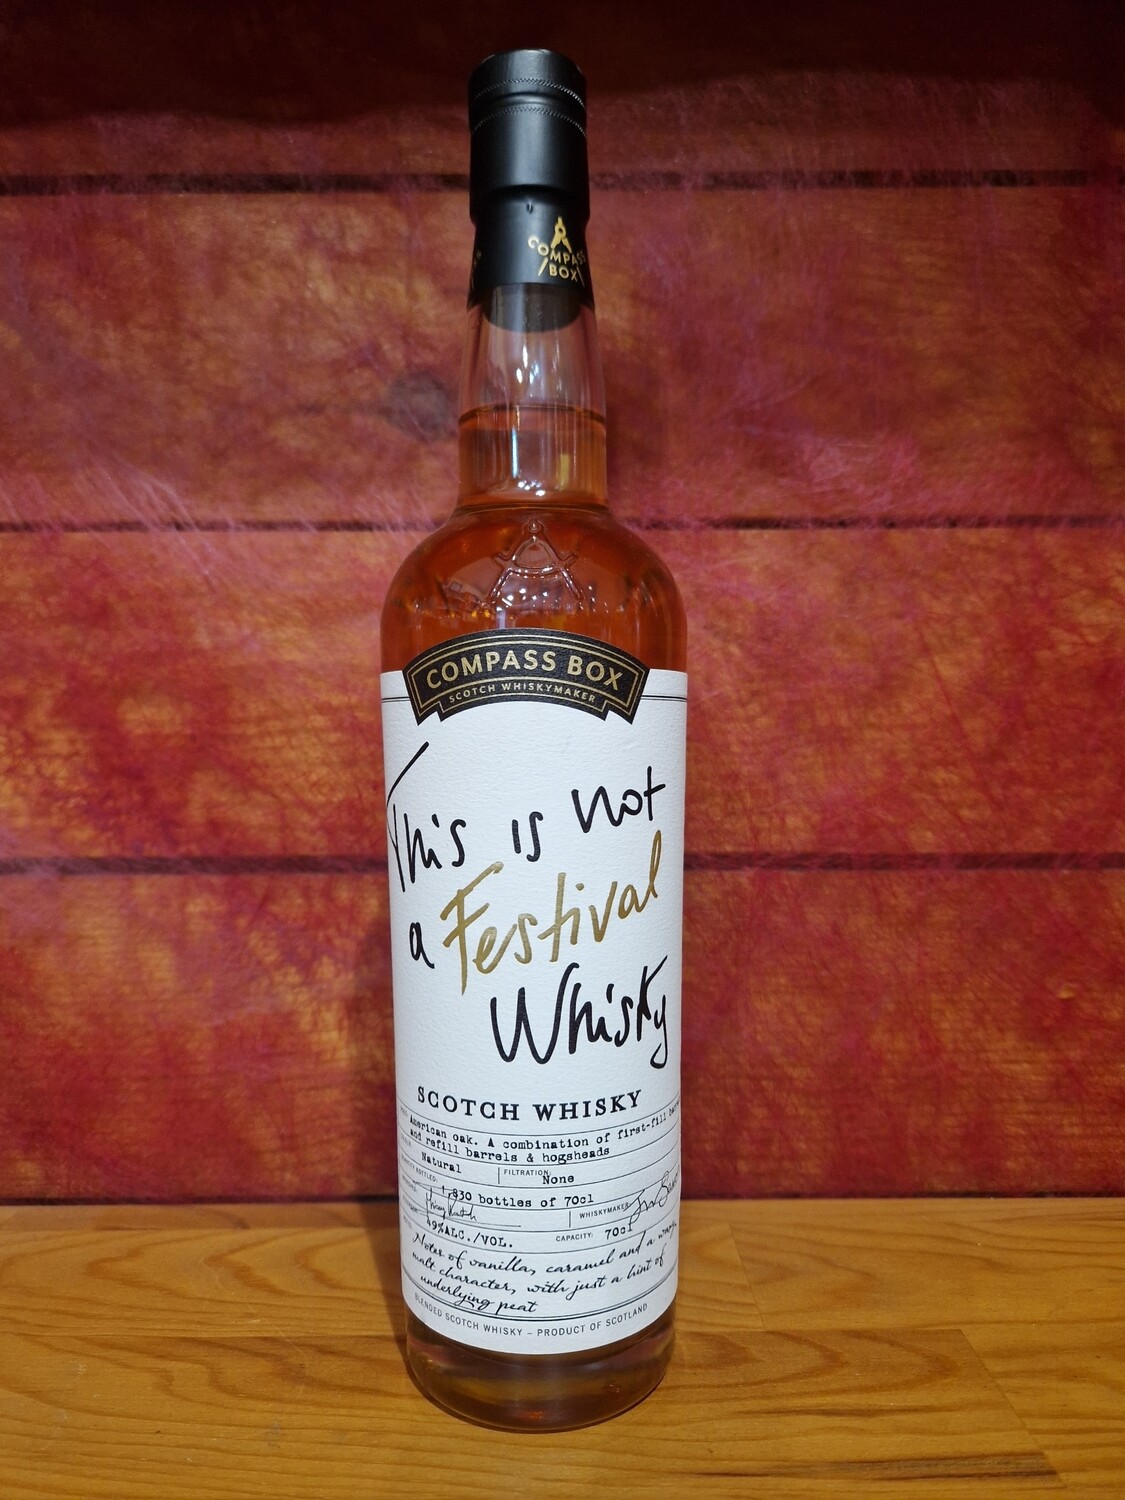 This is not a festival whisky compass box